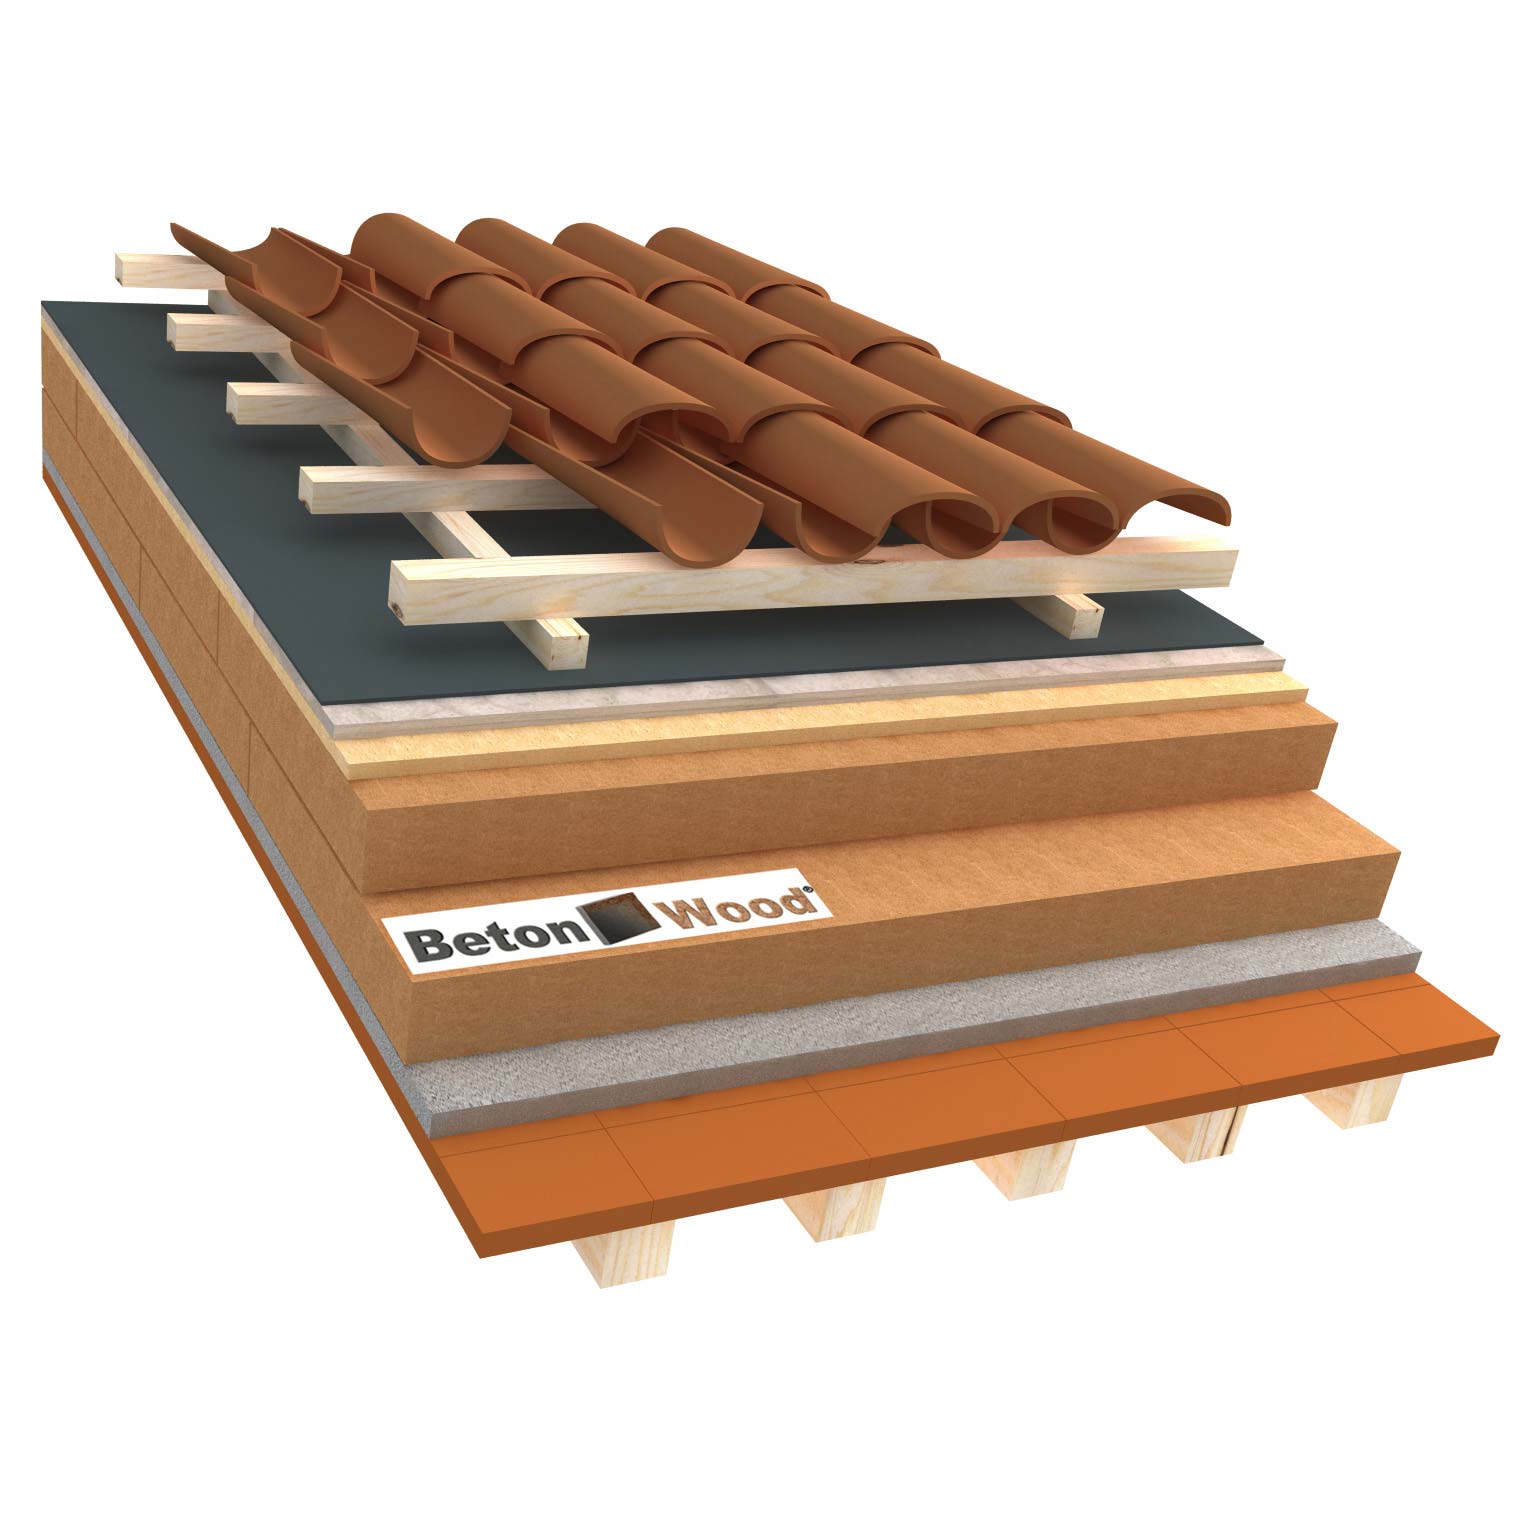 Ventilated roof with wood fiber Isorel, Universal dry and cement bonded particle boards on terracotta tiles